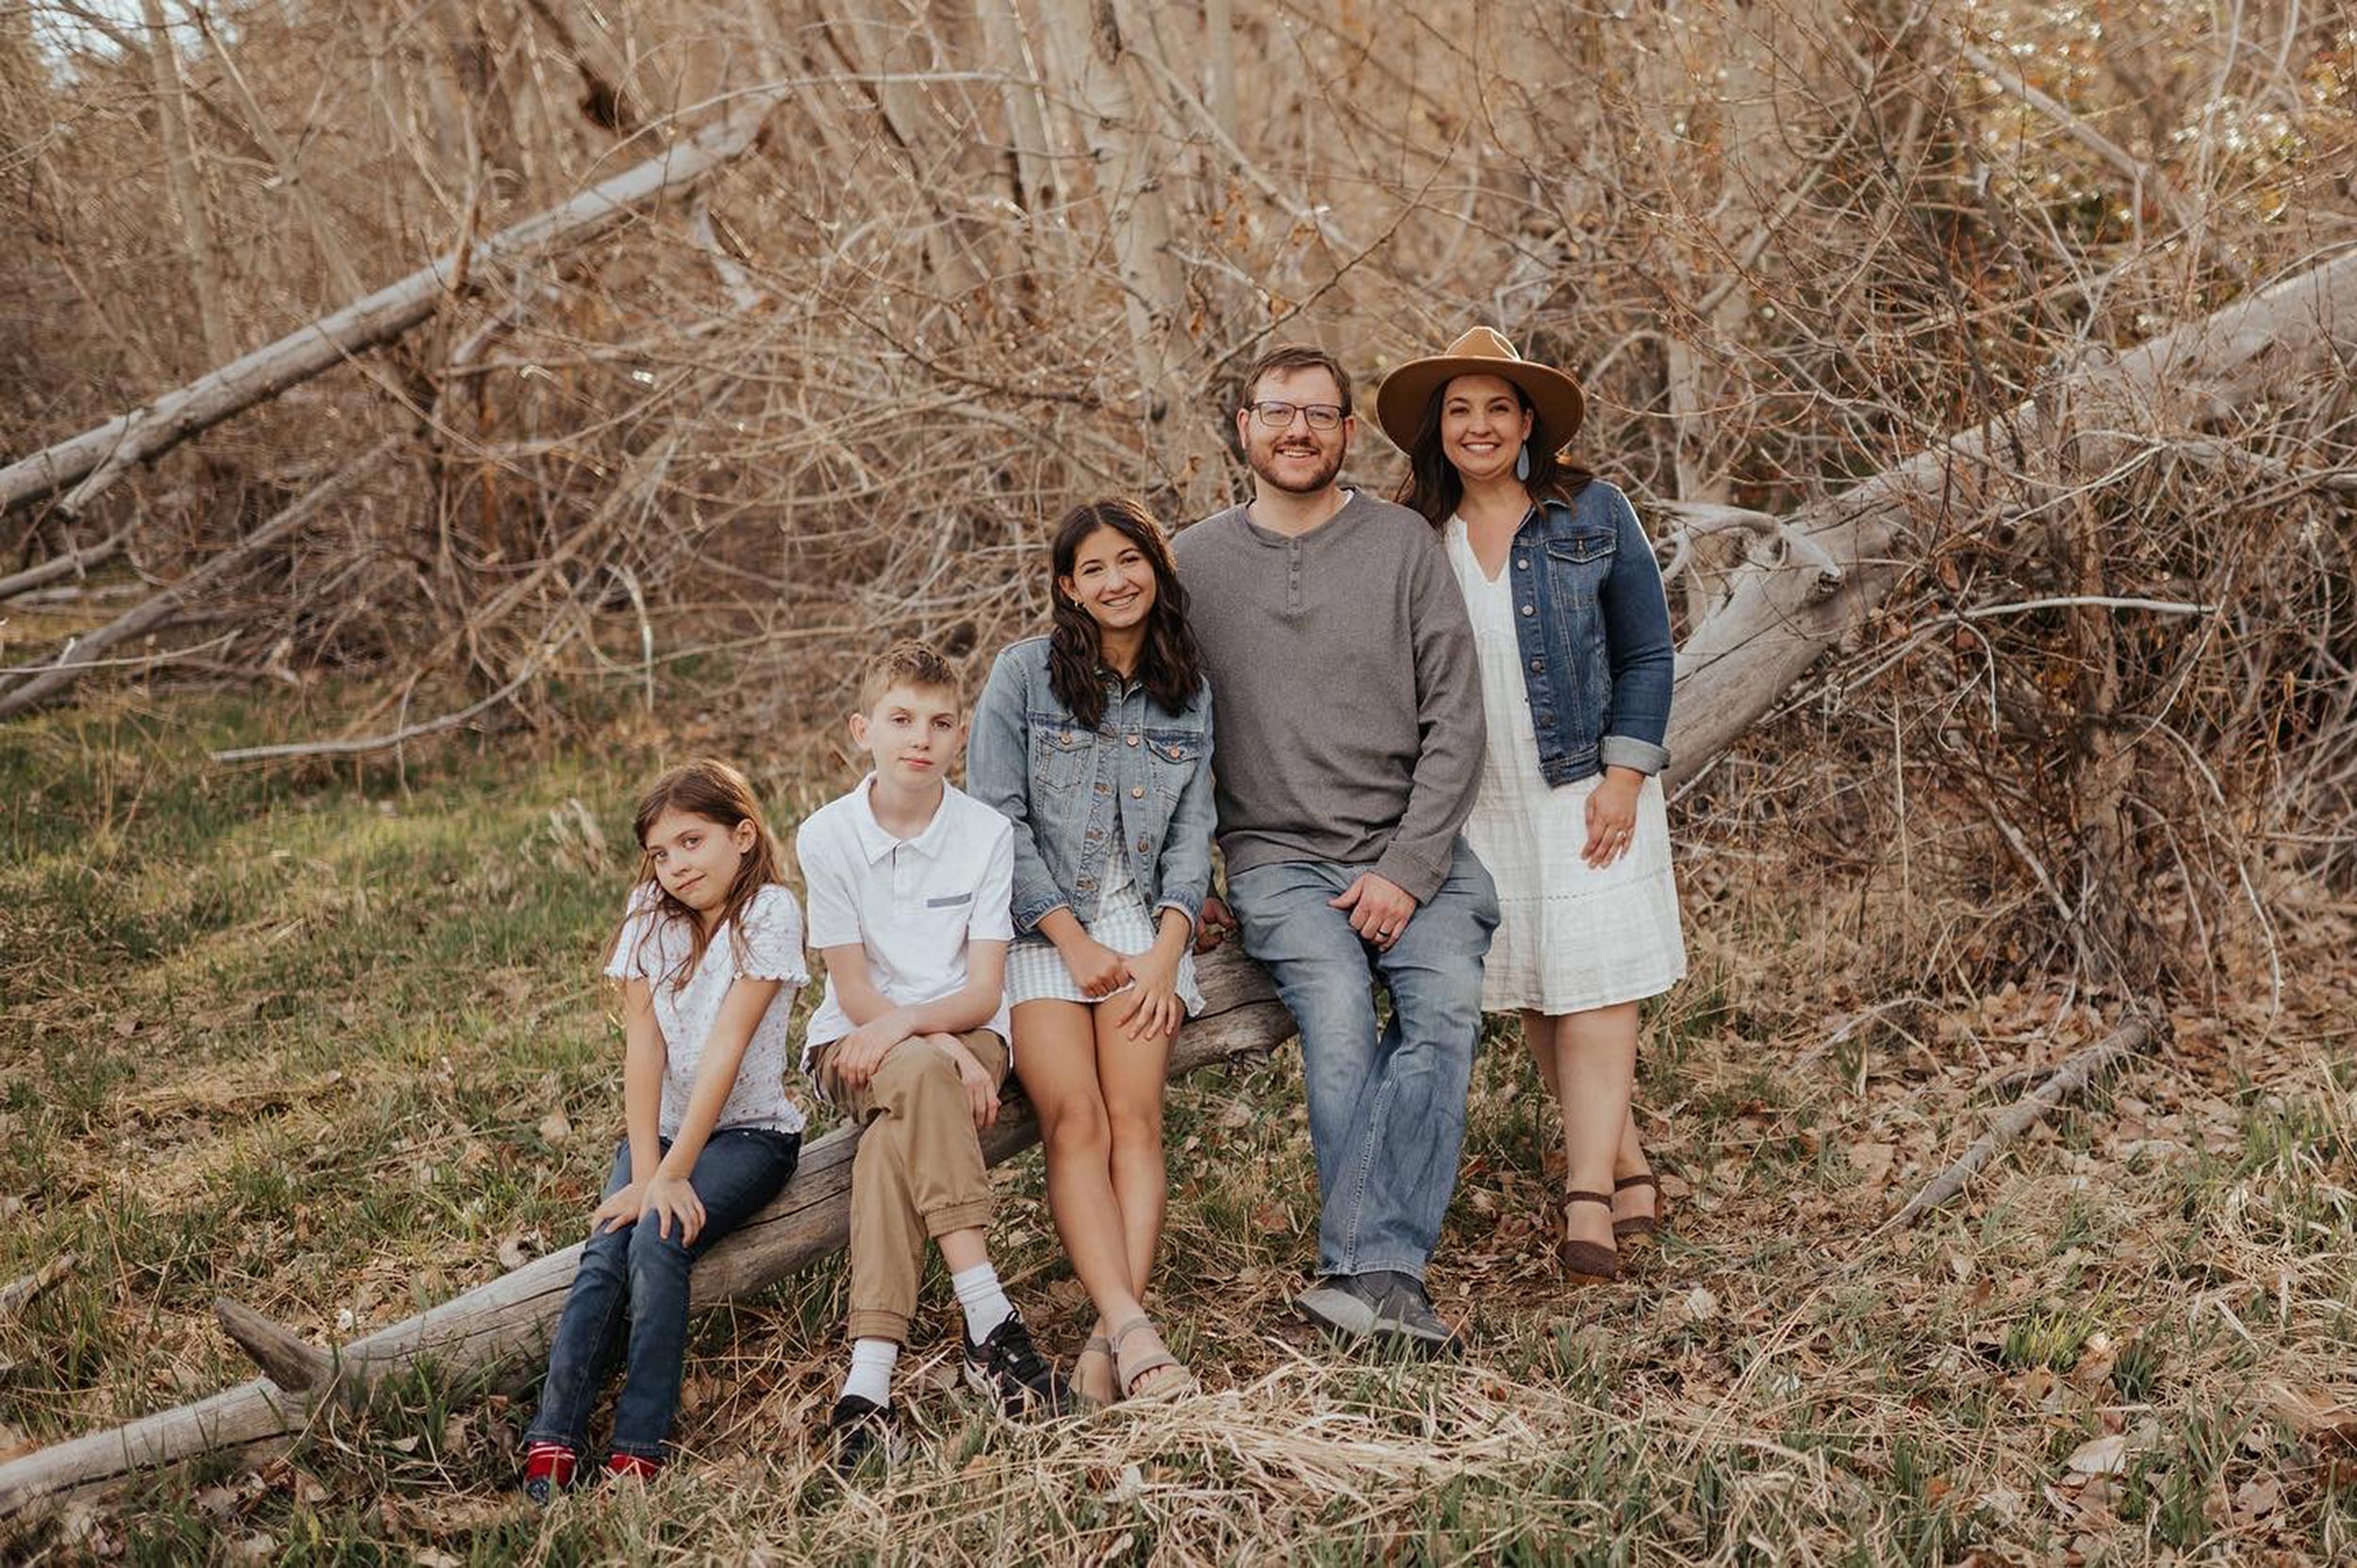 Christine Hull with her family in Verdi, Nevada for a family photo (husband, Will, oldest daughter Ainsleigh, son, Nolan, and youngest daughter, Delaney).